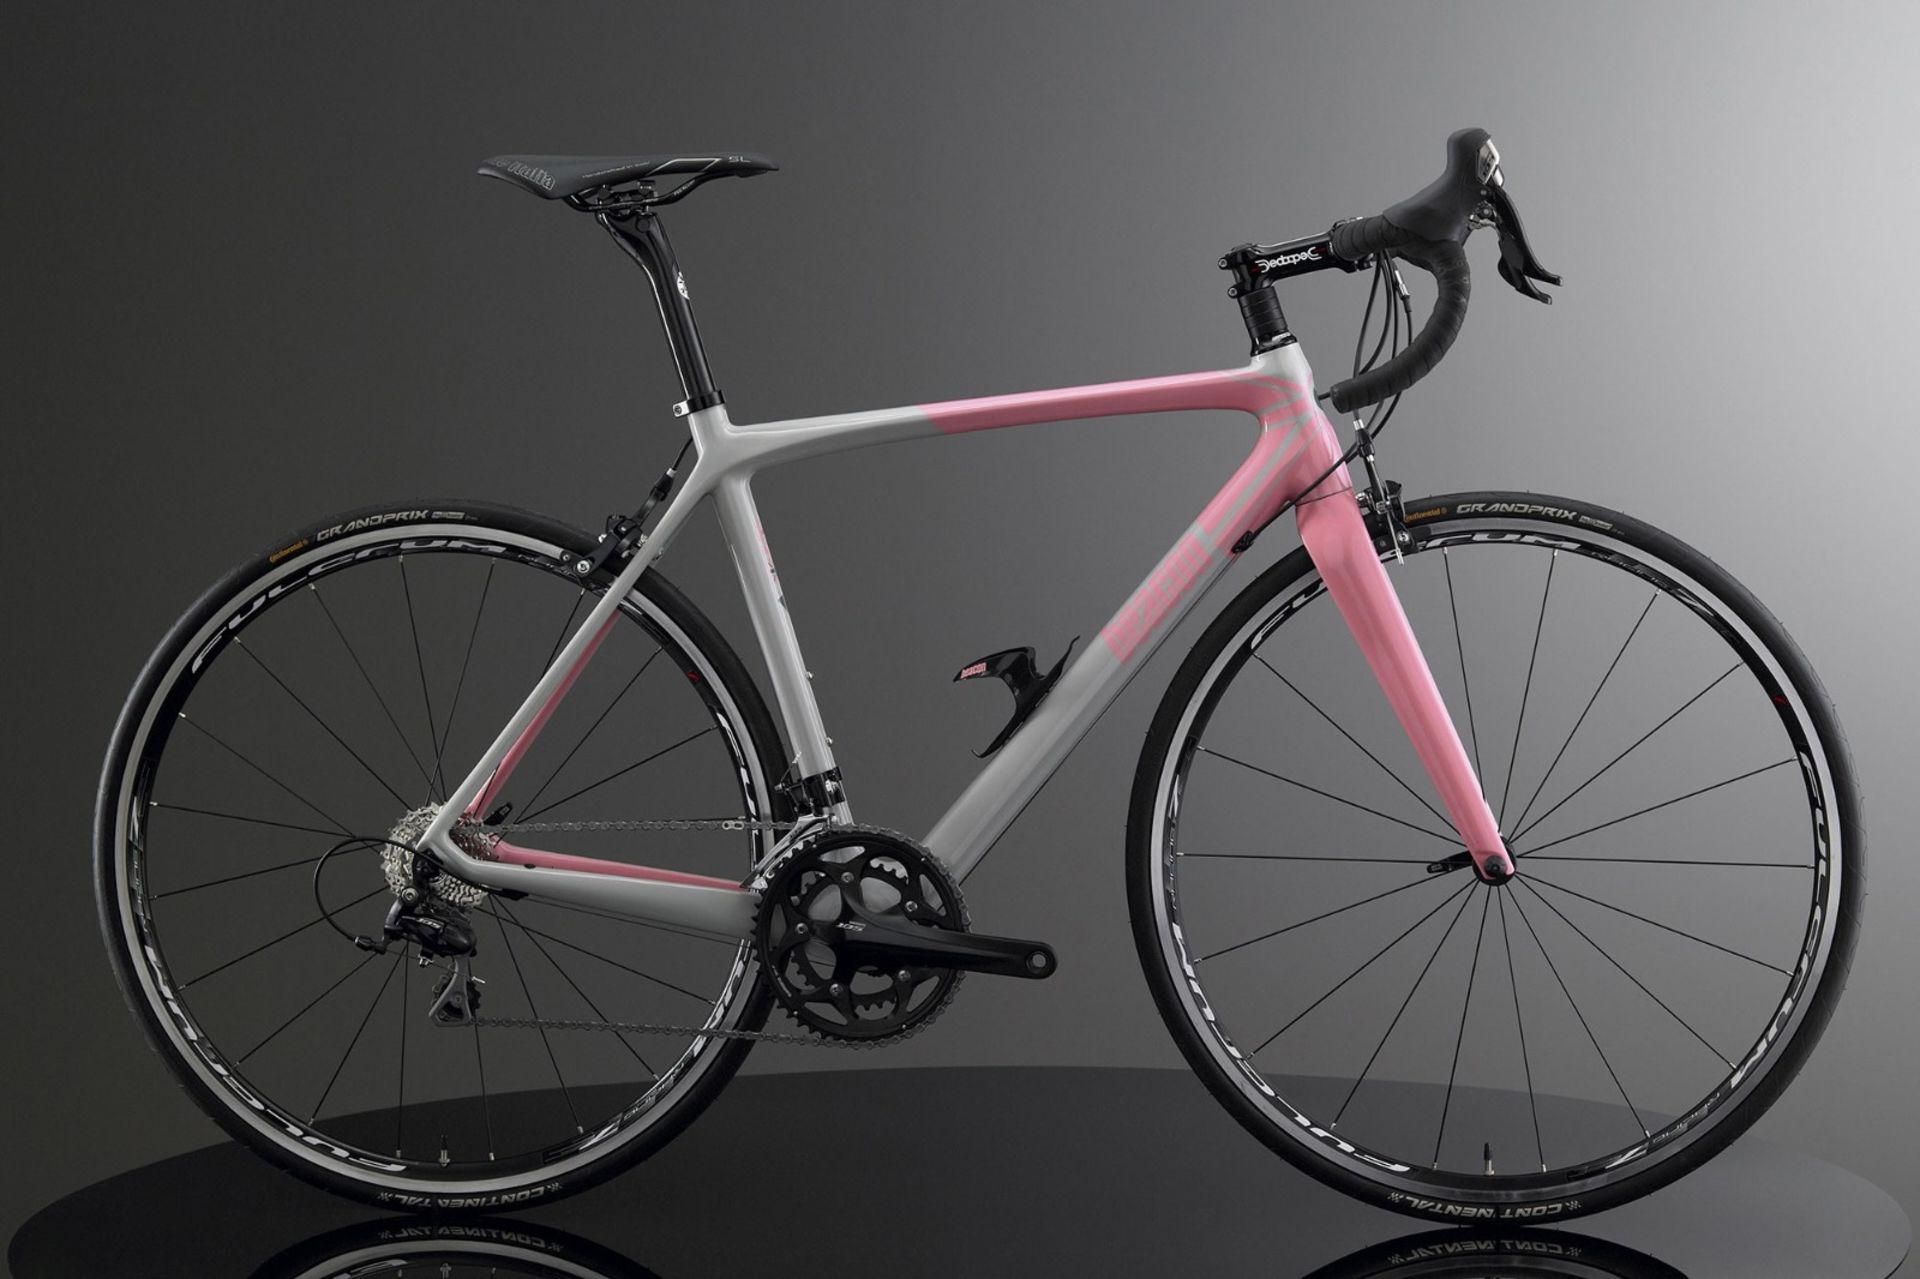 1 x Beacon Model BF-70, Size 560, Carbon Fibre Bike Frame in Grey & Pink. - Image 2 of 3